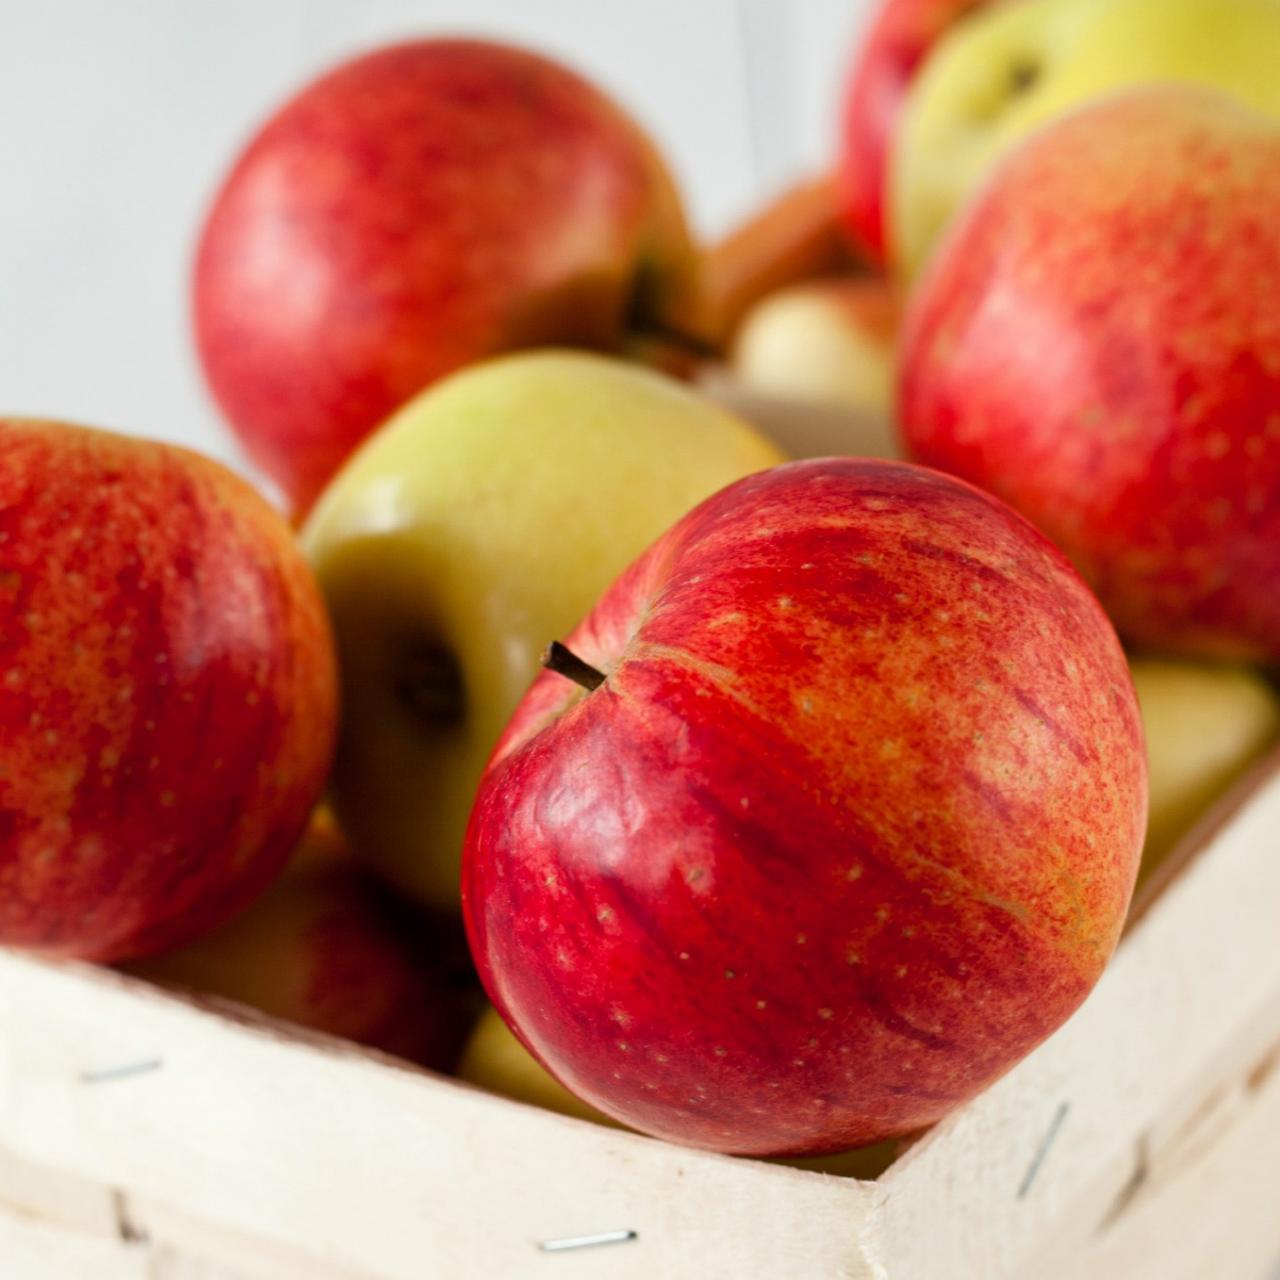 7 Best Apples For Juicing (& Which to Avoid) - Clean Eating Kitchen